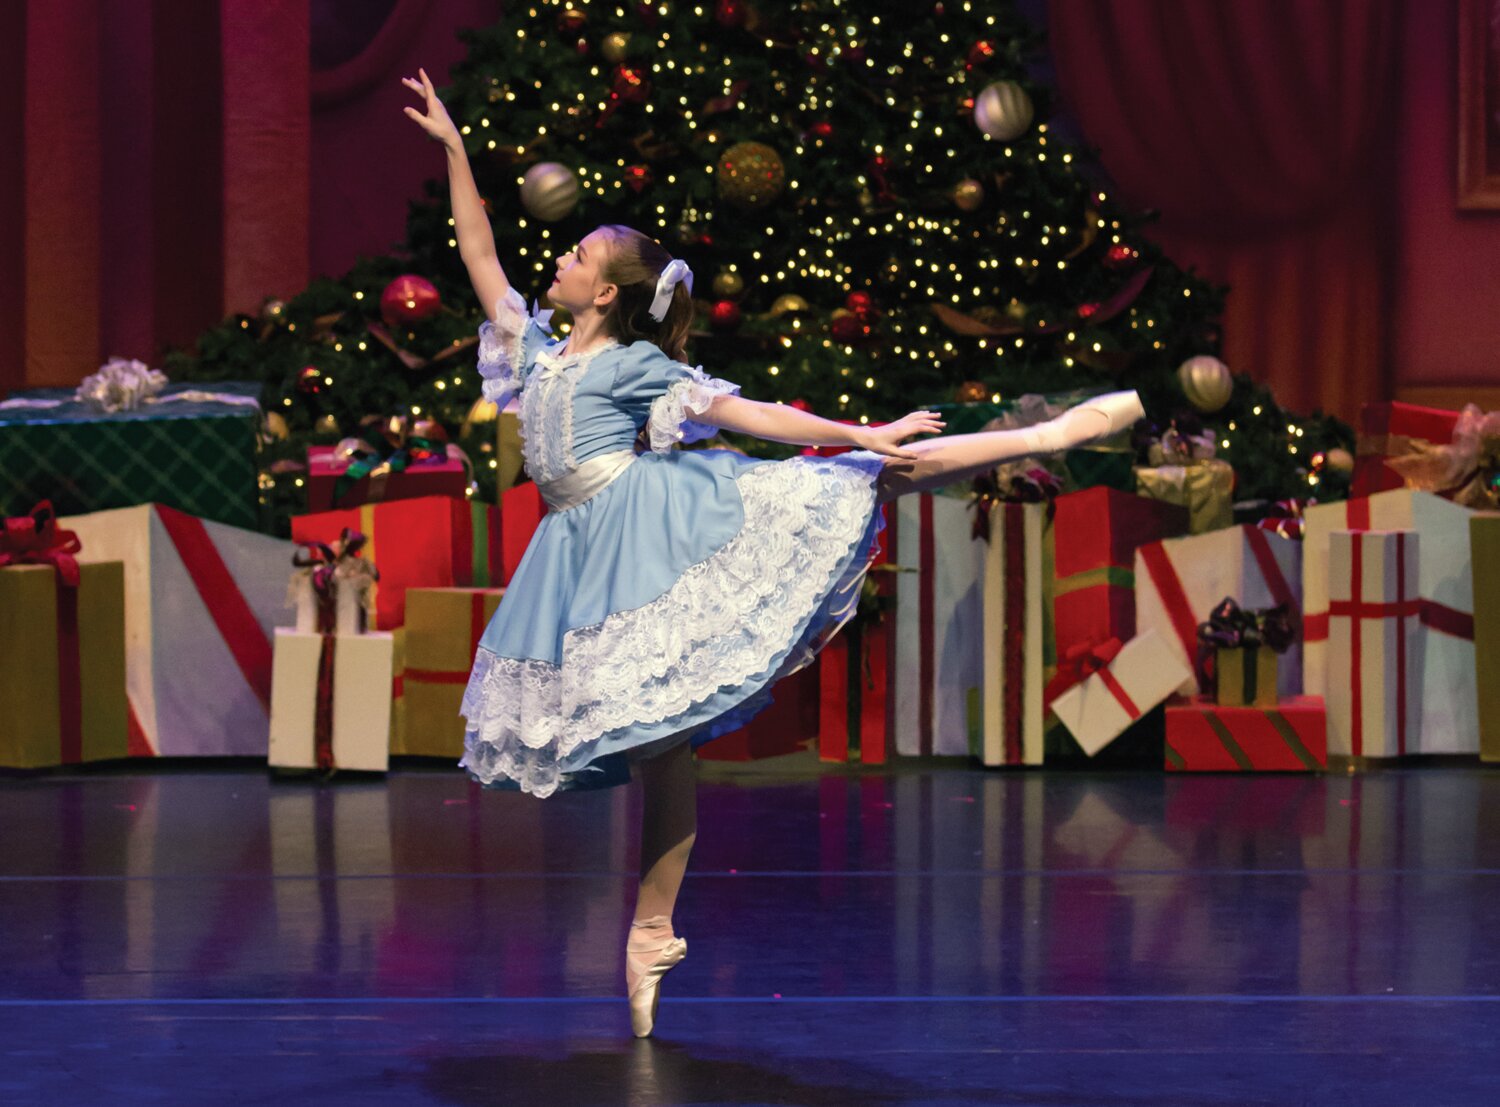 The Mississippi Metropolitan Ballet will hold performances at Jackson Academy.